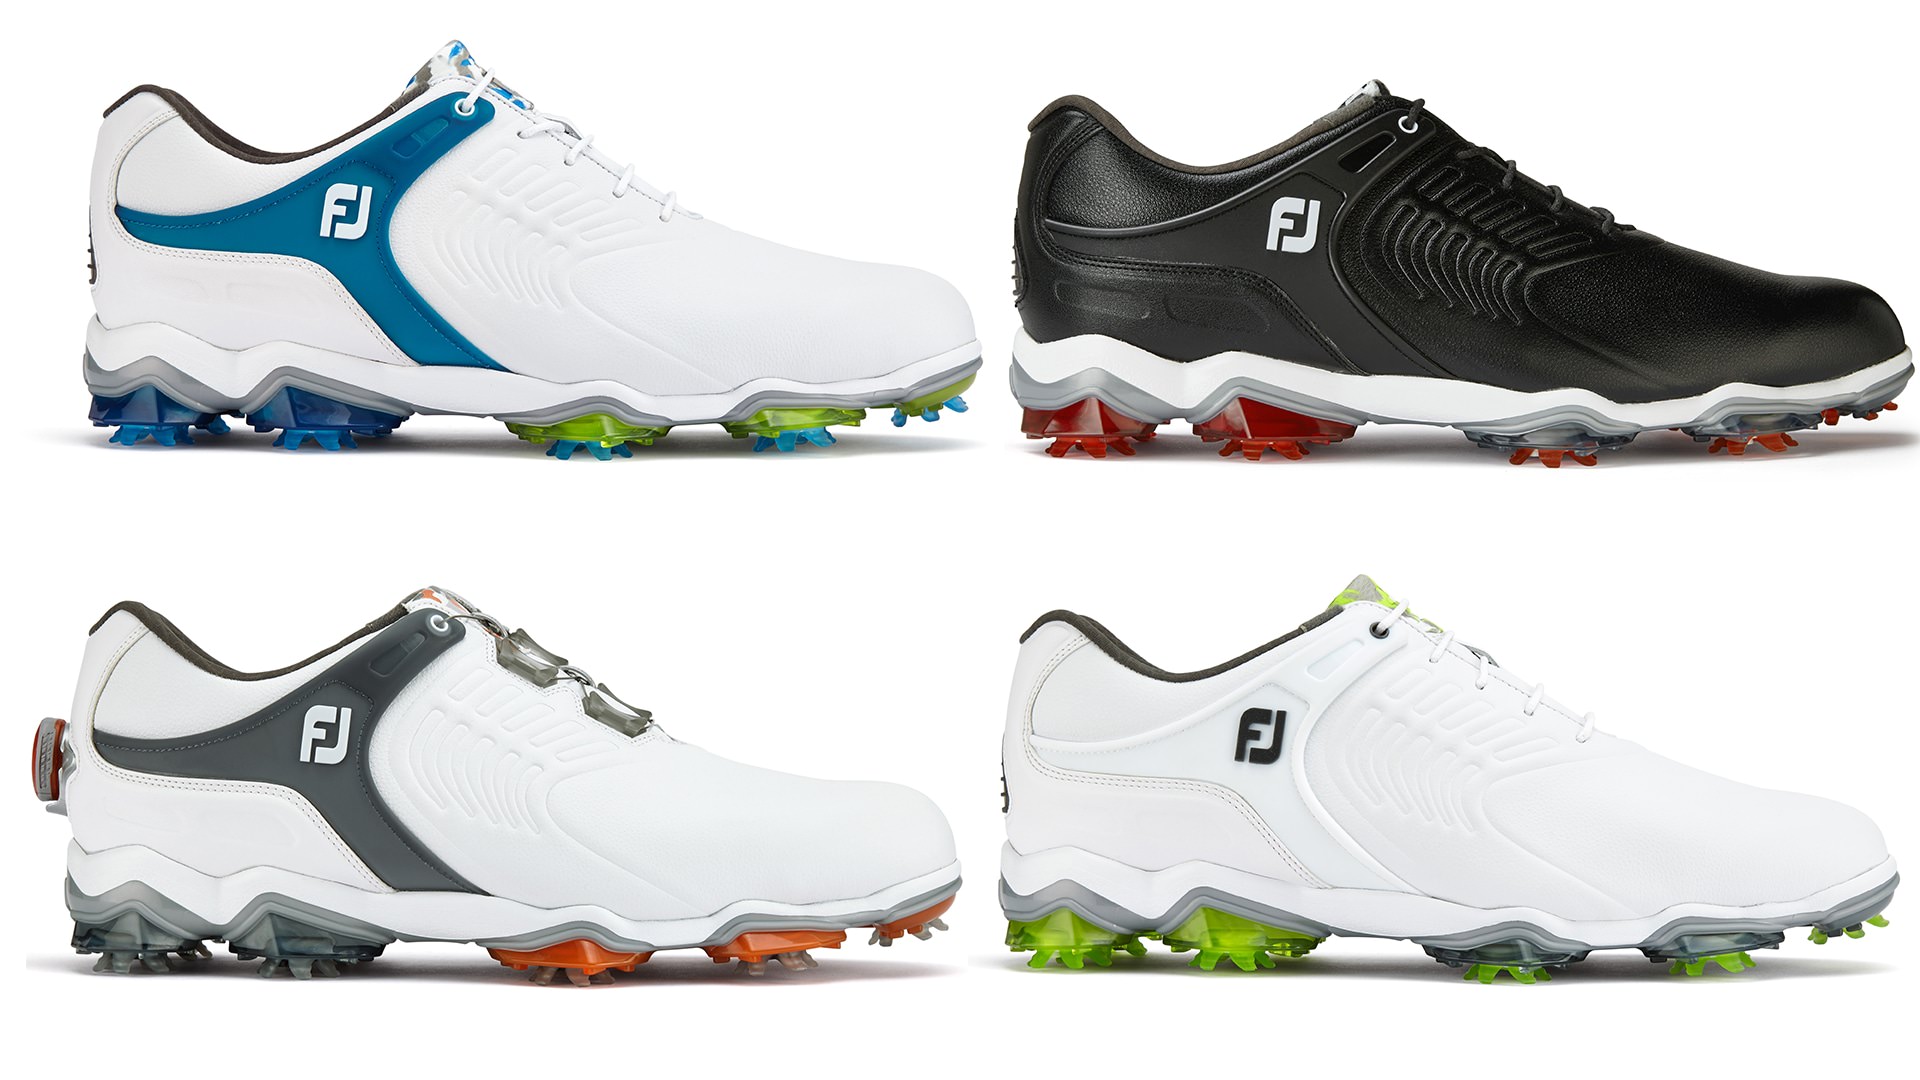 Spiked vs spikeless golf shoes